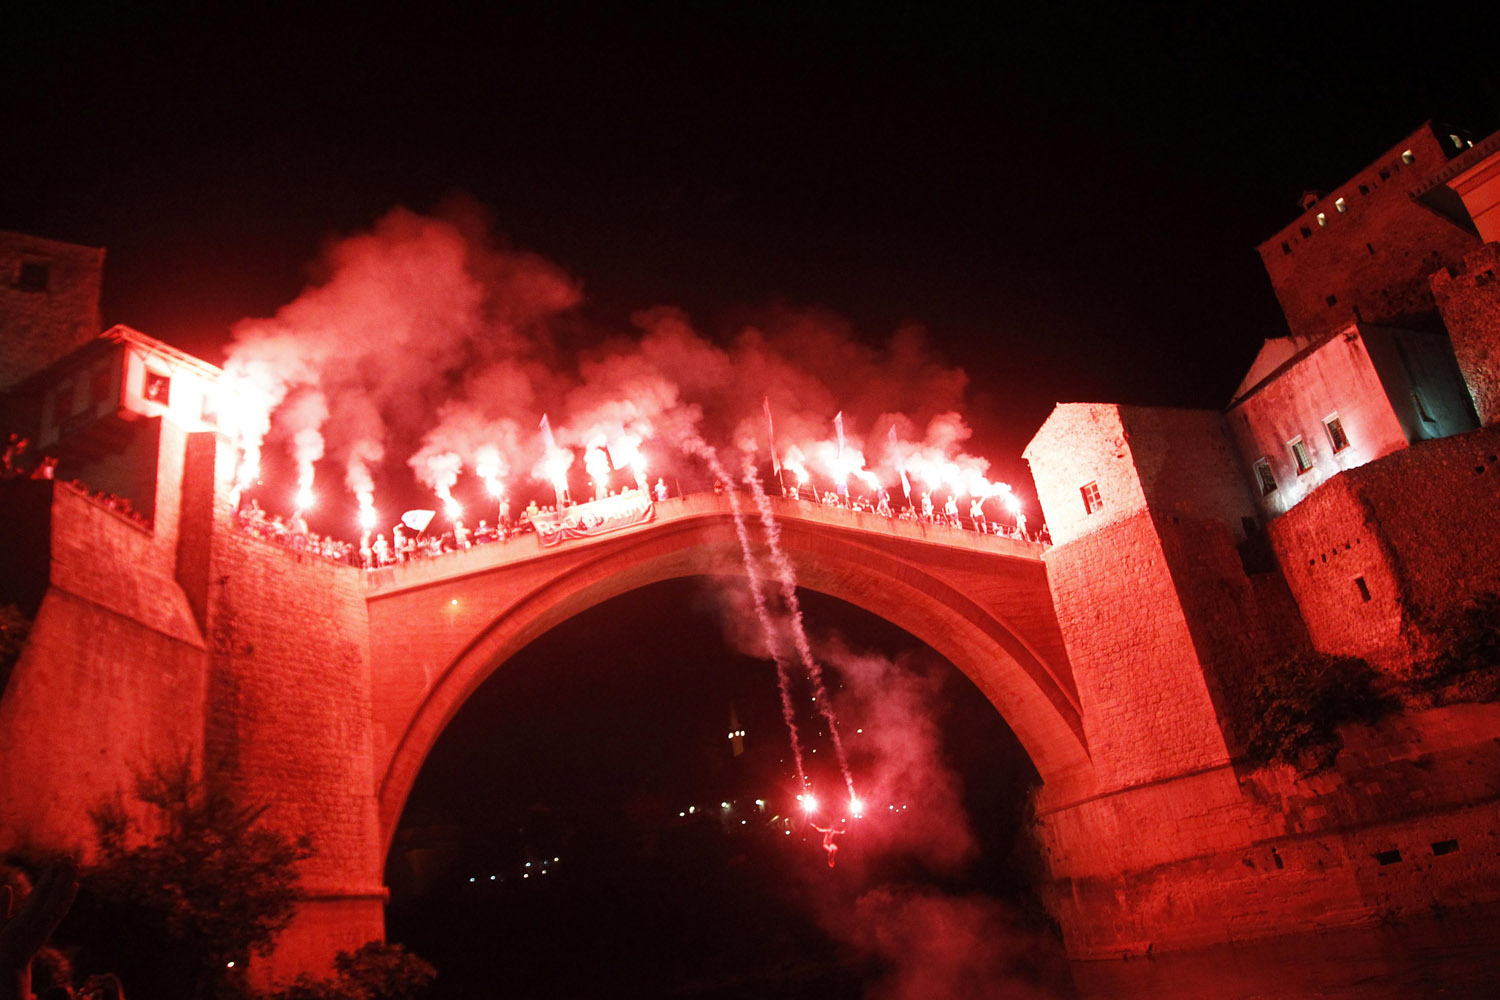 July 28, 2013. A man jumps from the Old Bridge in Mostar, Bosnia.